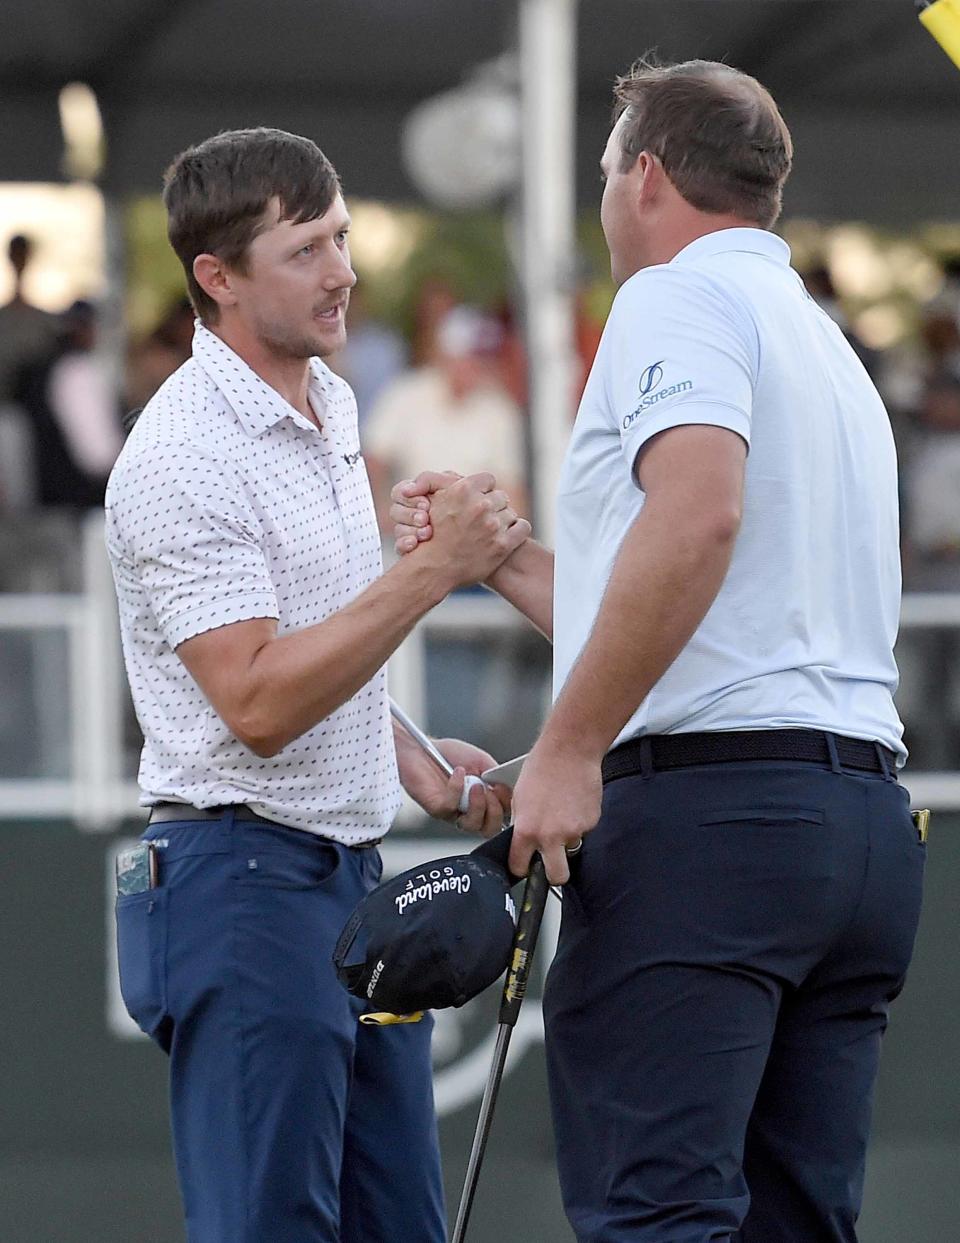 Sepp Straka (right) has lost two tournaments in playoffs in the last three months. One was to Mackenzie Hughes (left) in the Sanderson Farms Championship.